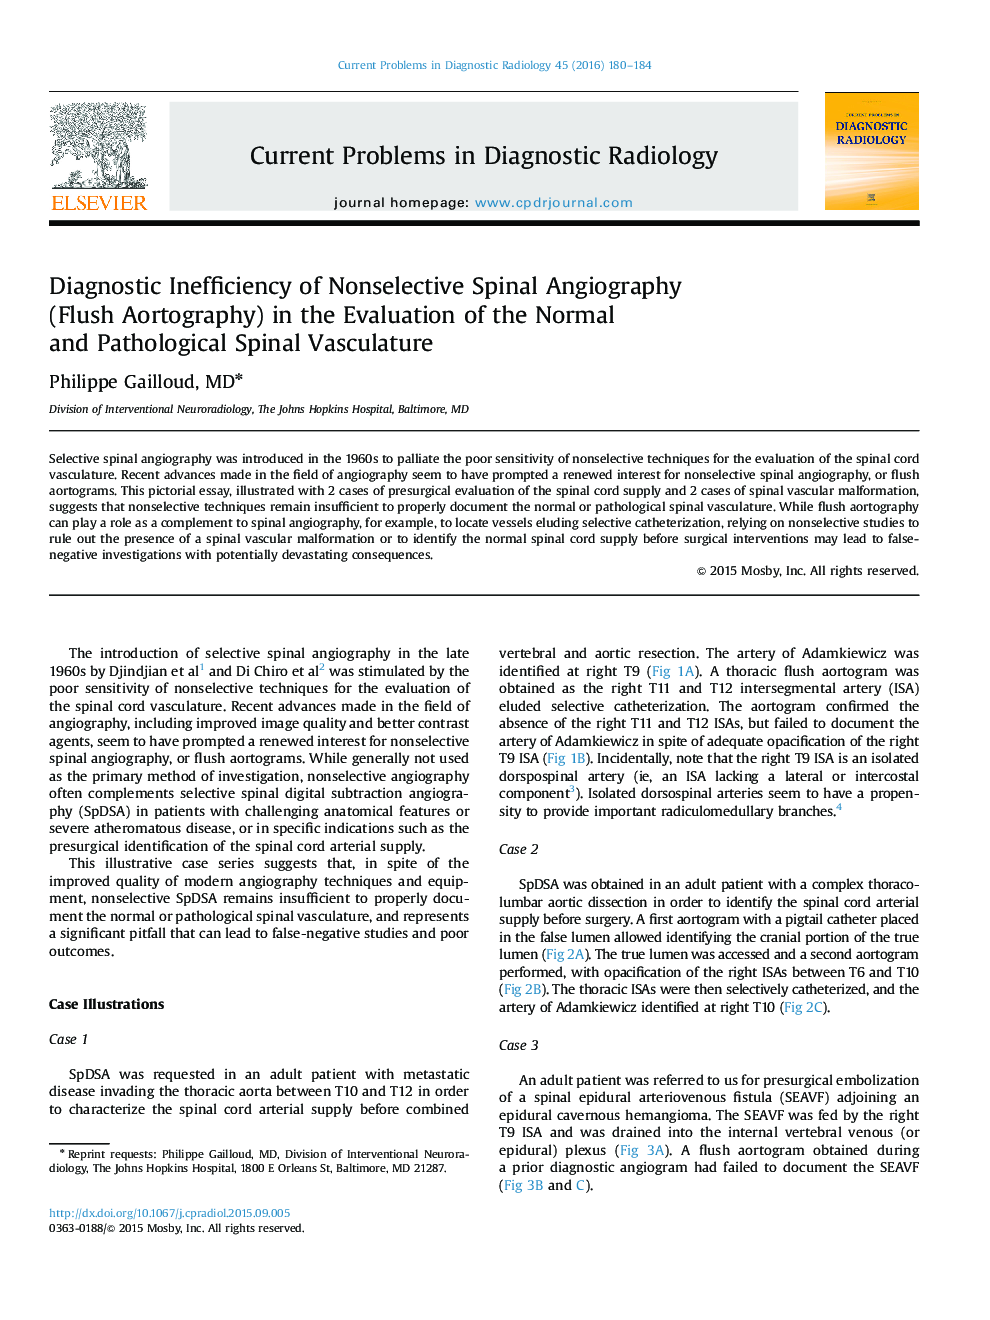 Diagnostic Inefficiency of Nonselective Spinal Angiography (Flush Aortography) in the Evaluation of the Normal and Pathological Spinal Vasculature